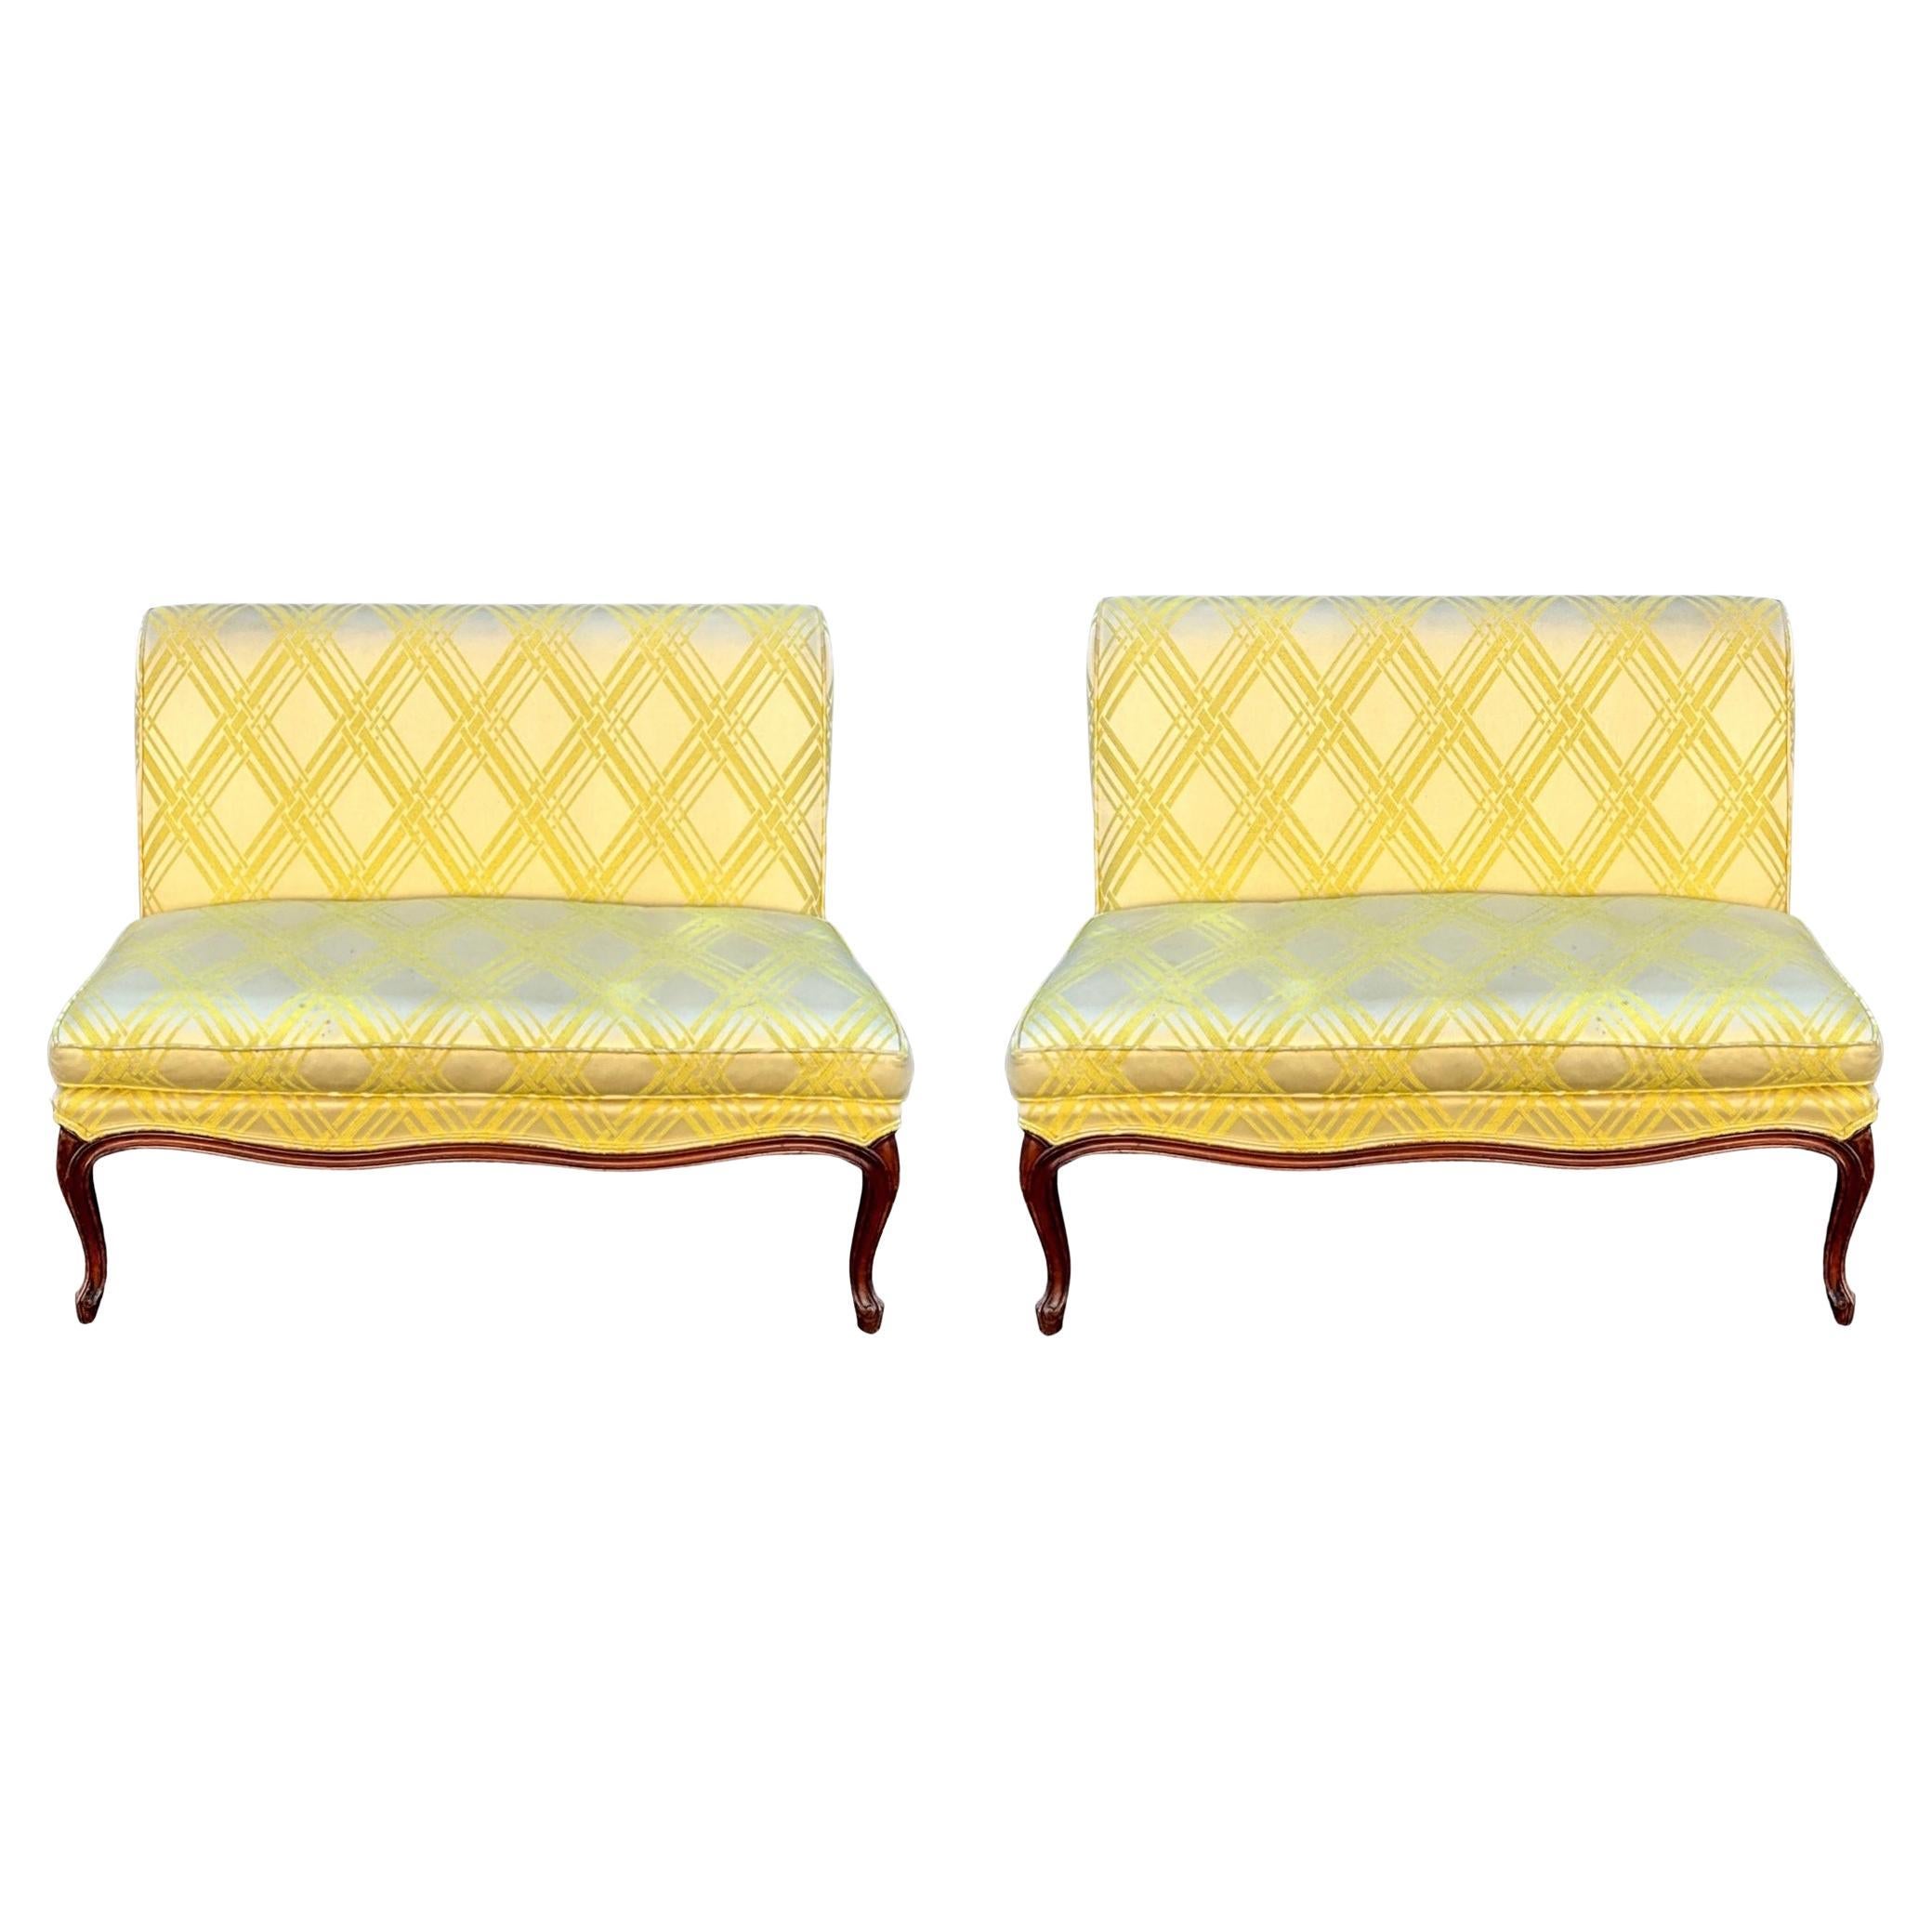 This is a lovely pair of midcentury French Provincial style carved fruitwood settees in a pretty vintage yellow fabric. They are American and in very good condition. The fabric show slight wear. The yellow feels like a silk blend. They are unmarked.